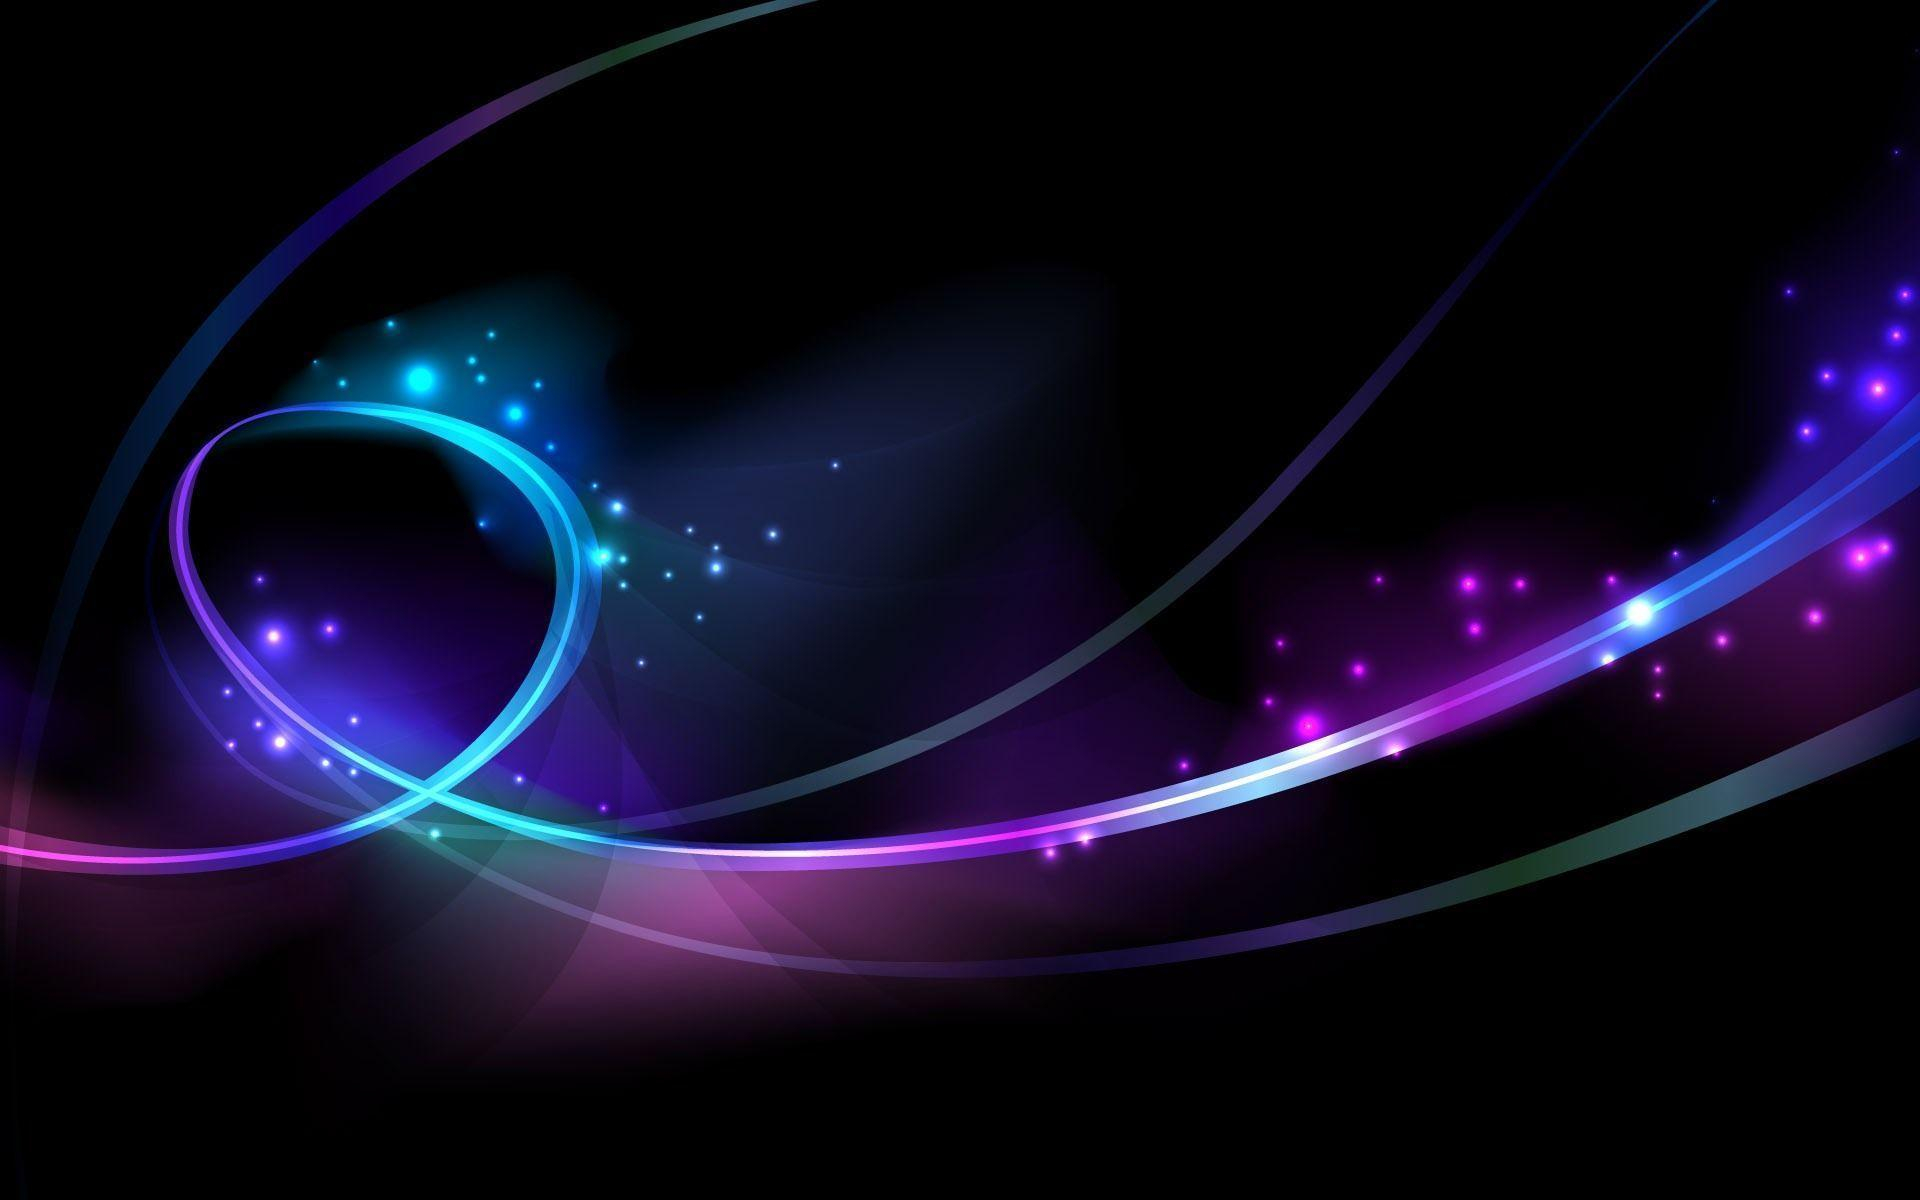 1920x1200 Blue And Purple Backgrounds